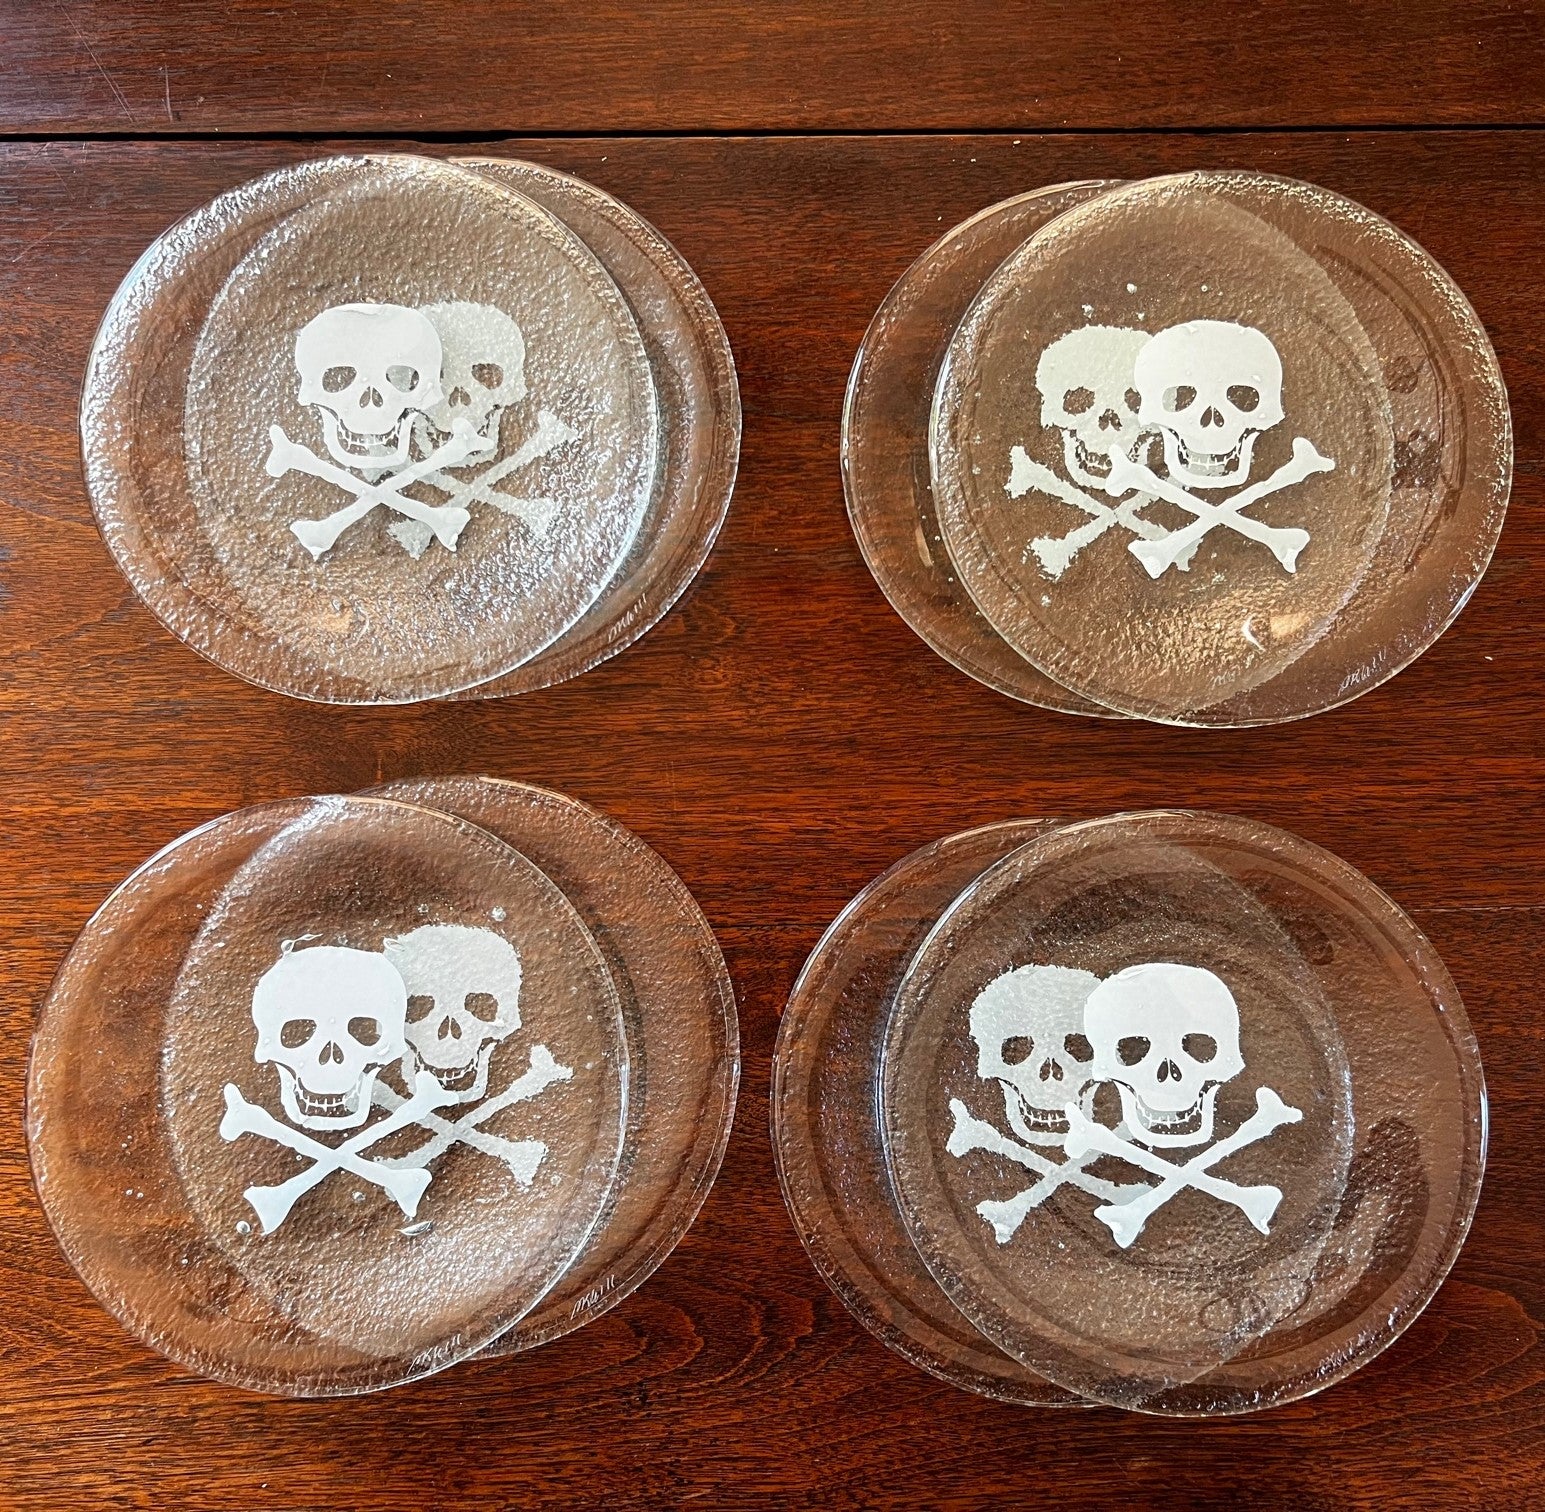 Late 20th C., a set of 8 seeded glass side plates with a white skull and crossbones design. These plates are substantial. The skull and crossbone design is incorporated into the seeded glass, not printed on.

Dimensions:
8